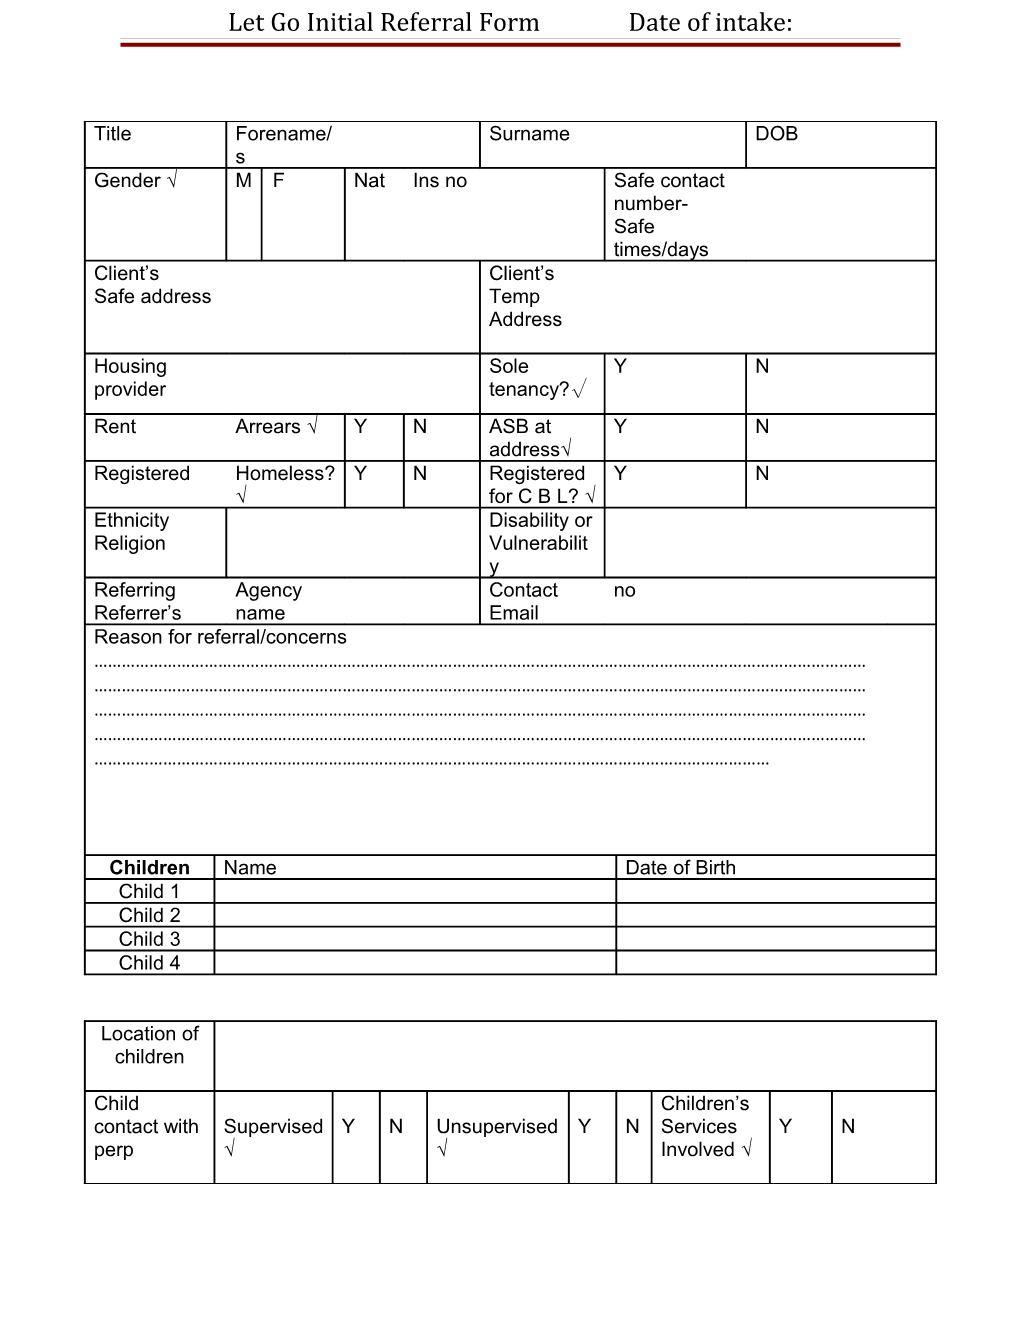 Let Go Initial Referral Form Date of Intake